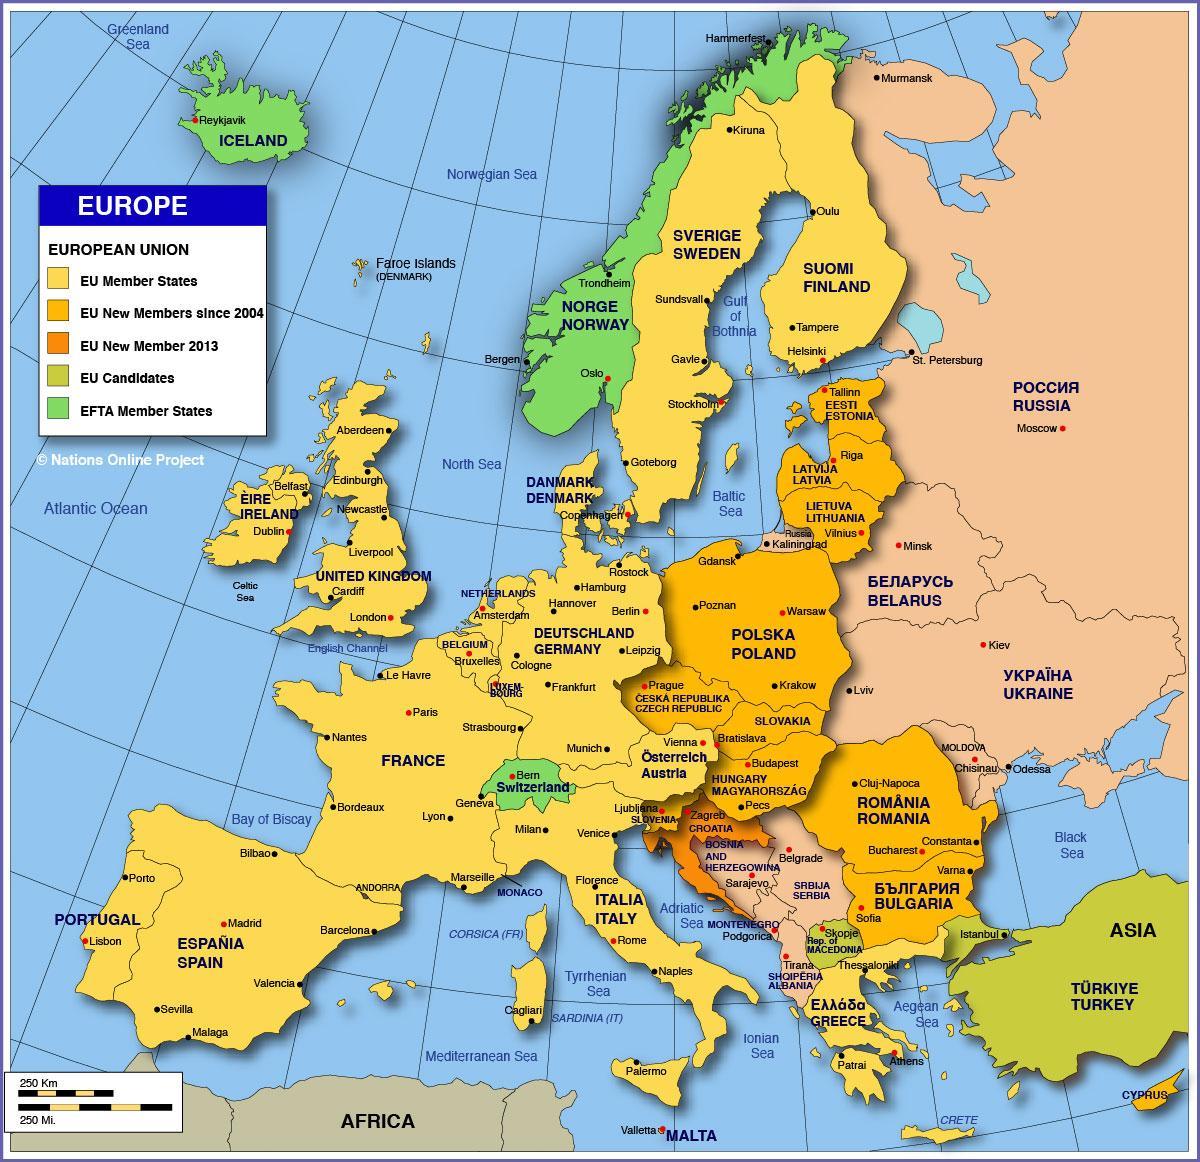 Moscow on map of europe